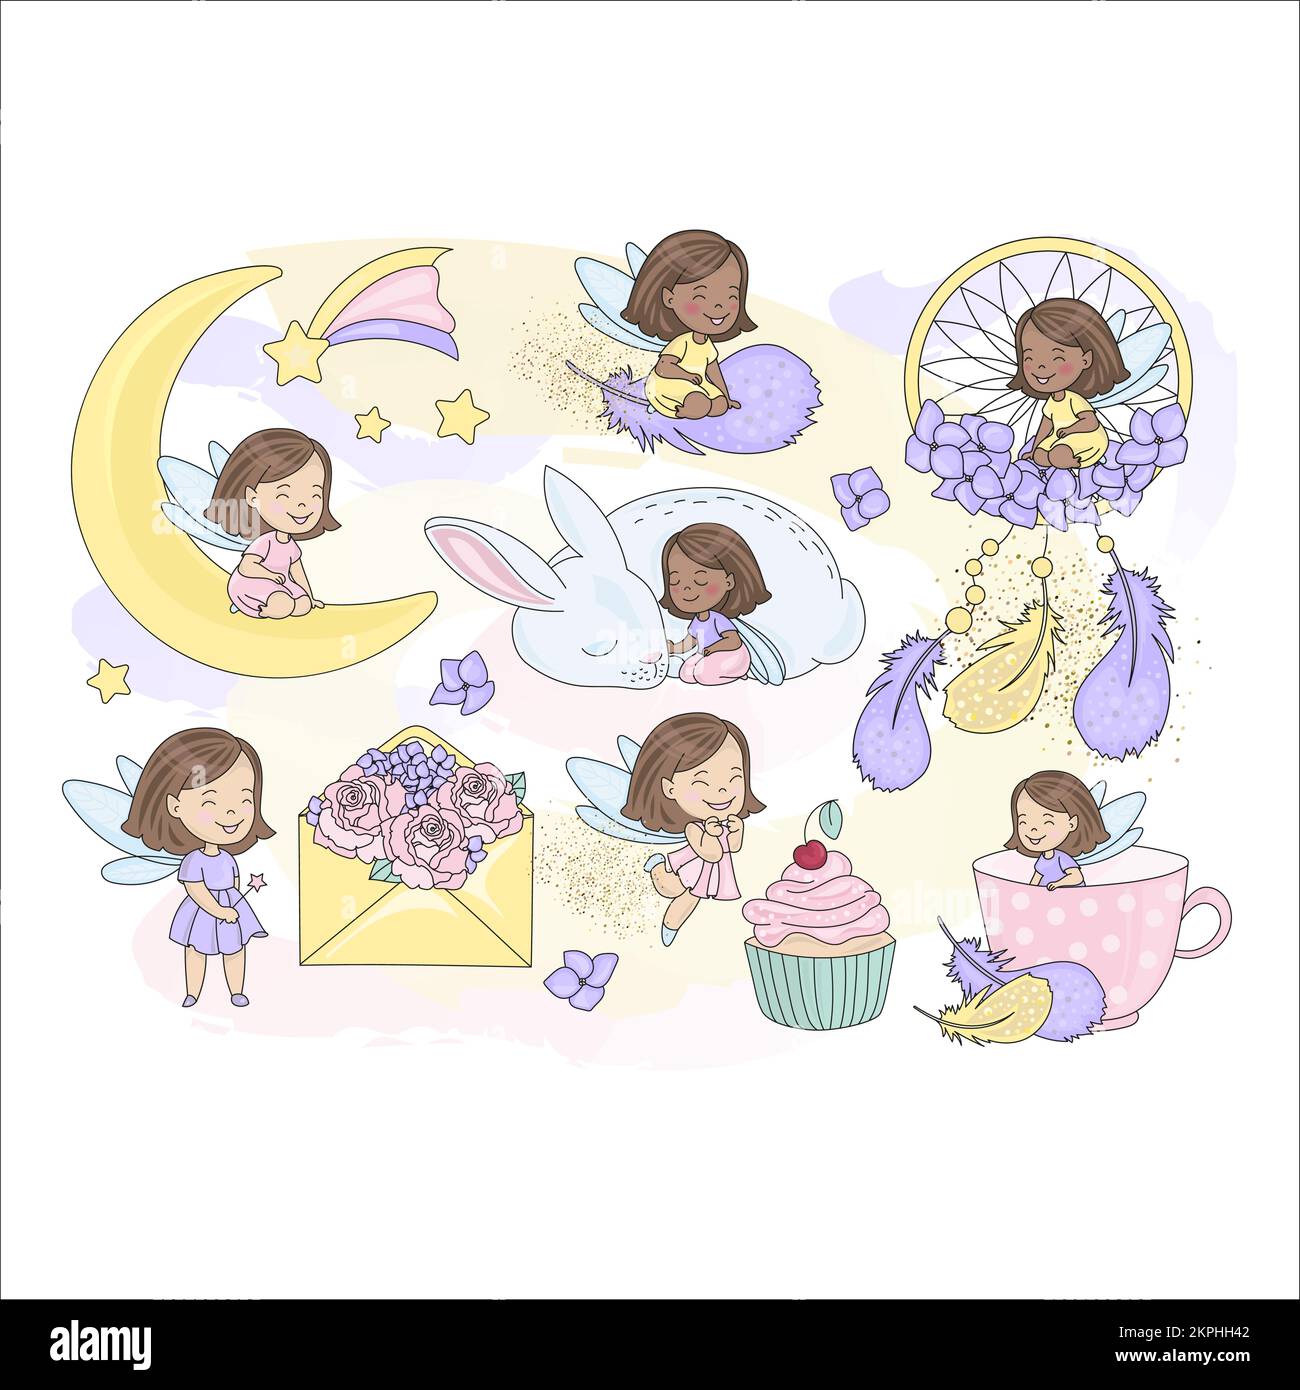 FIABE SCINTILLANTI Little Girl Sorceress with Wings Preparing for Holiday Flowers Sweets Dreamcatcher Cartoon clip Art Vector Illustration Set for Illustrazione Vettoriale